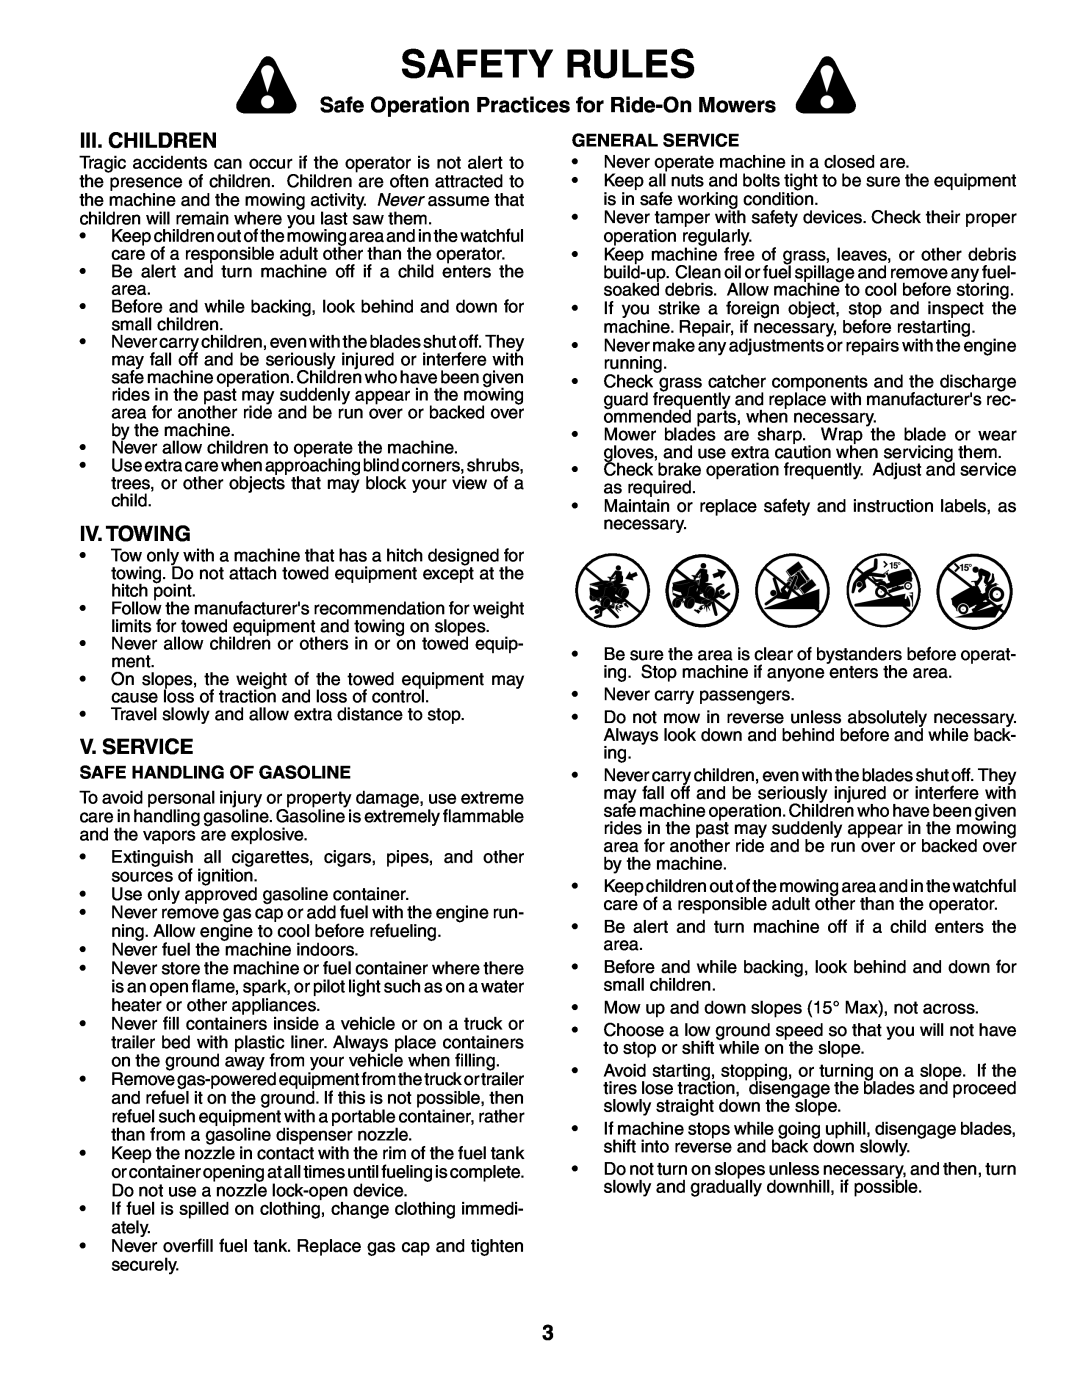 Poulan PD17542LT manual Iii. Children, Iv. Towing, V. Service, Safety Rules, Safe Operation Practices for Ride-On Mowers 